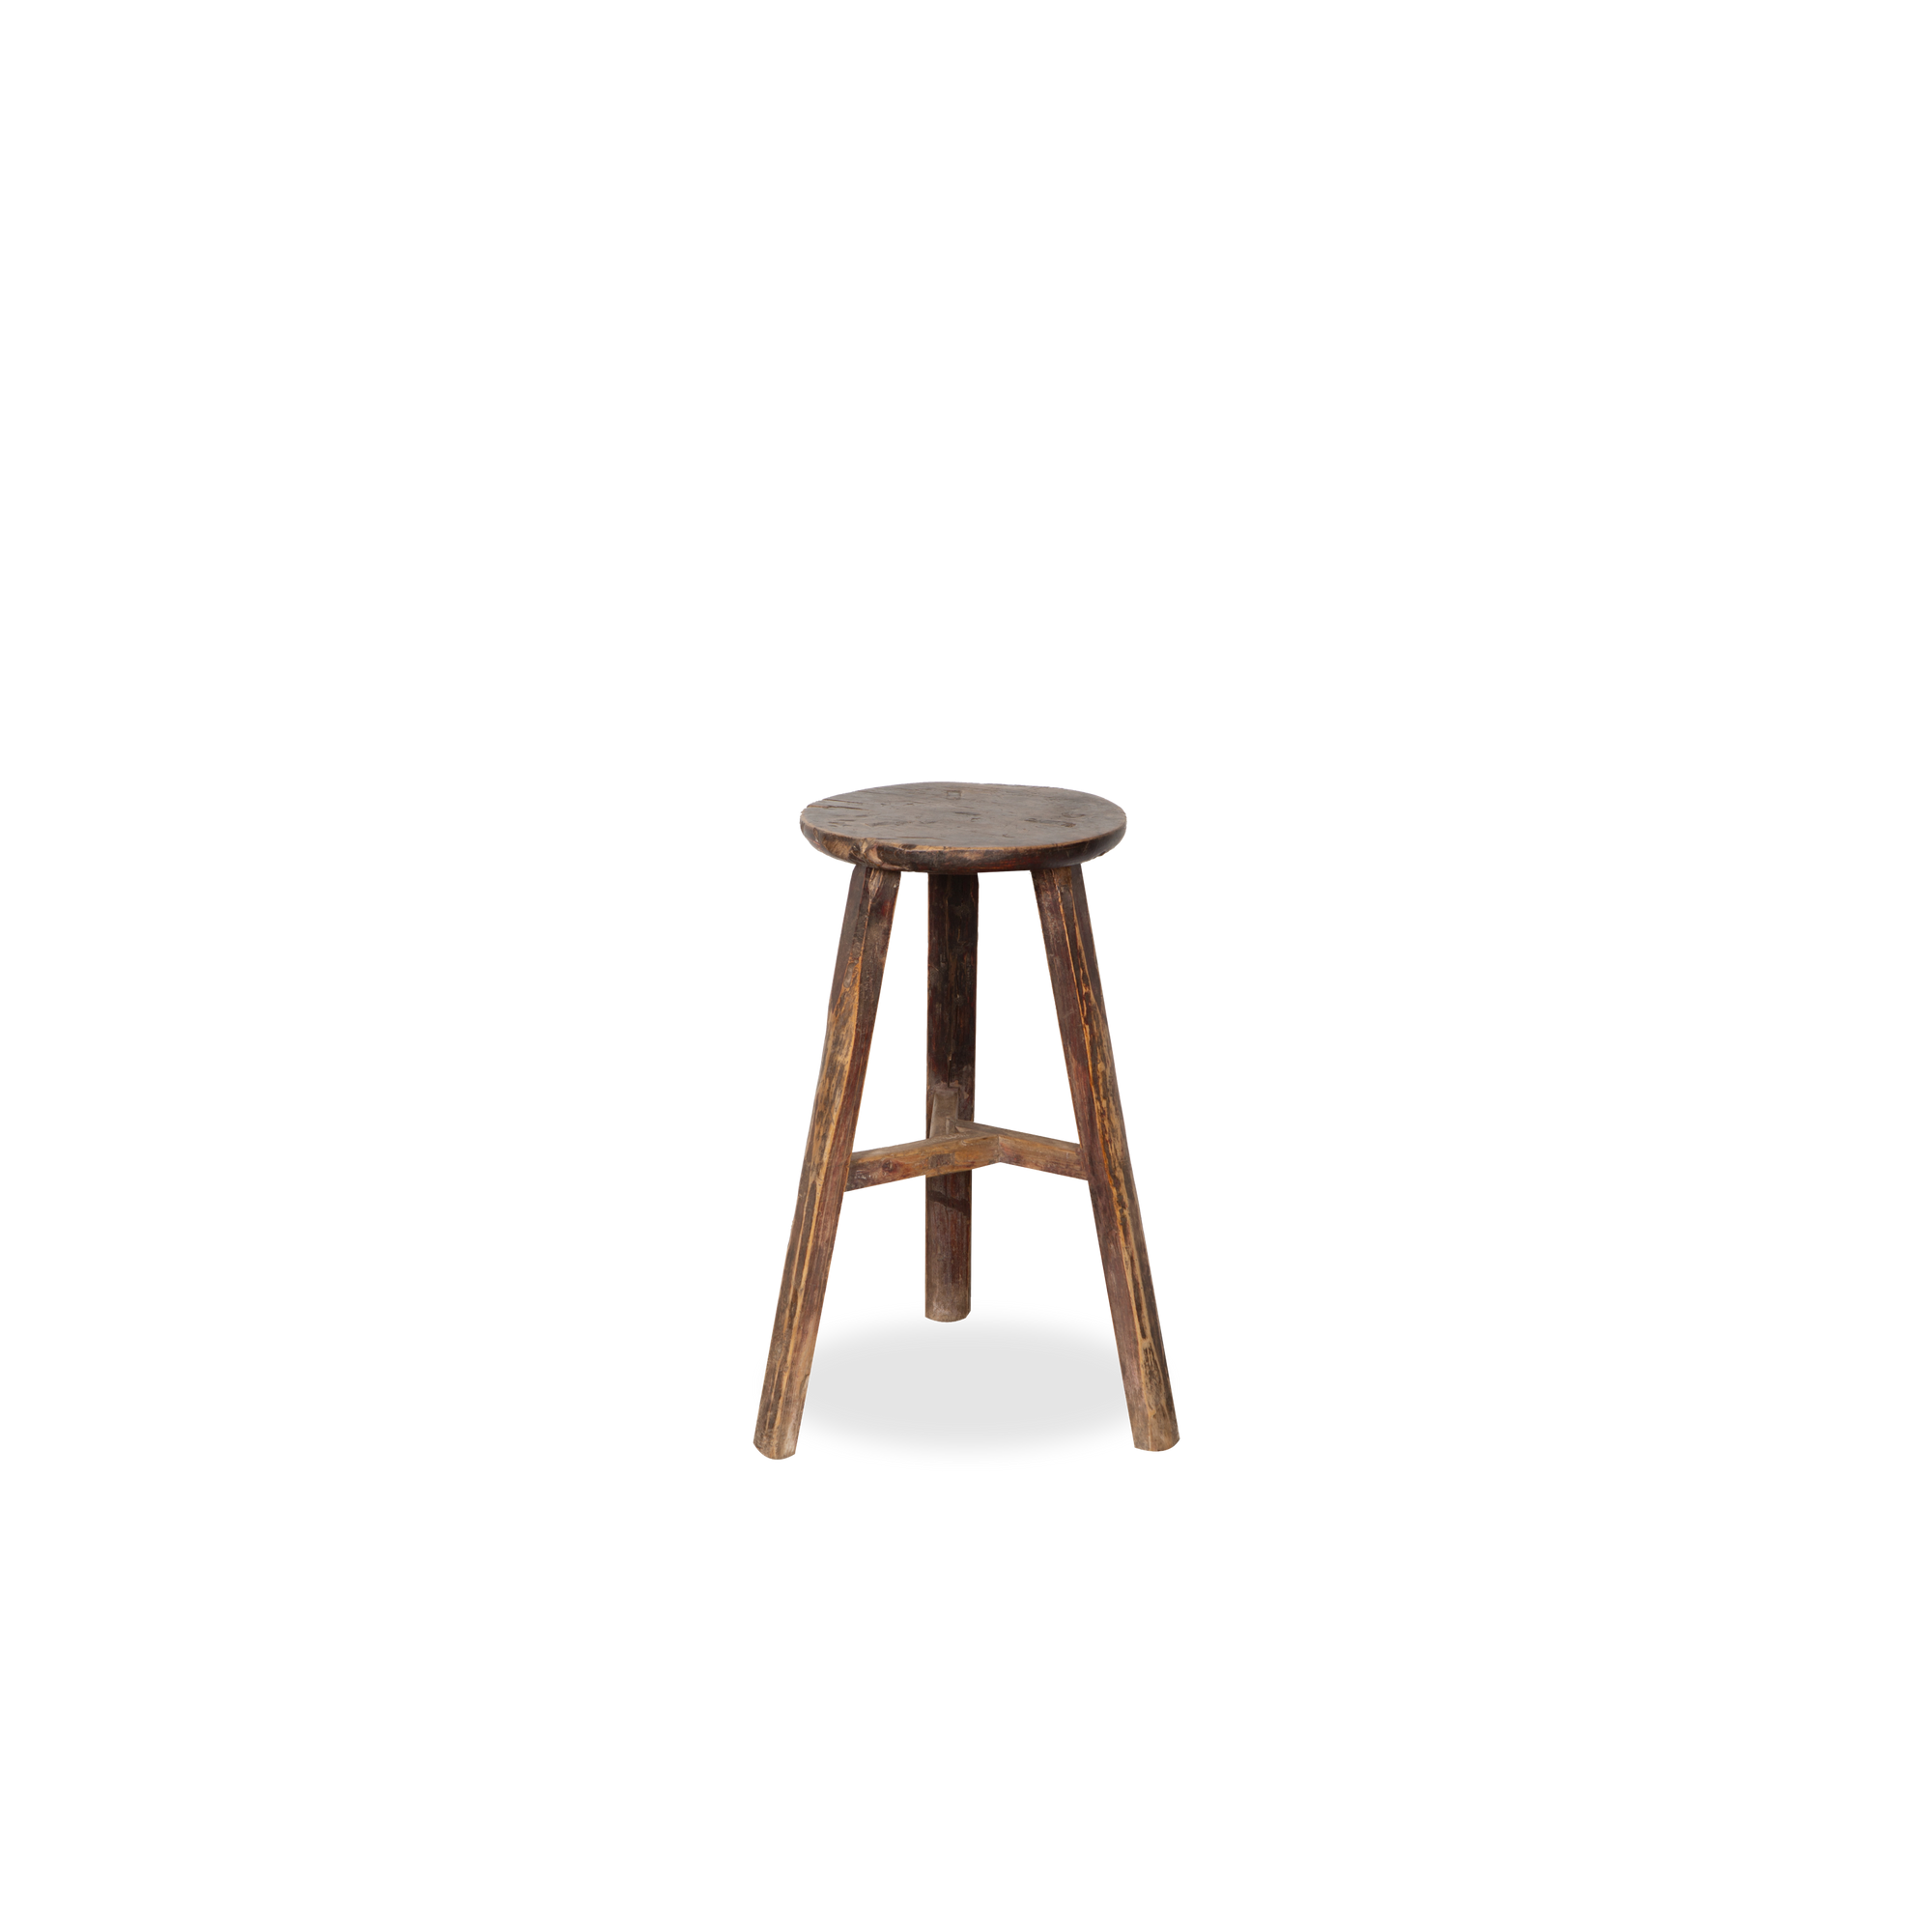 Full of rustic appeal, the Vintage Weathered Round Stool will add organic warmth to your space.